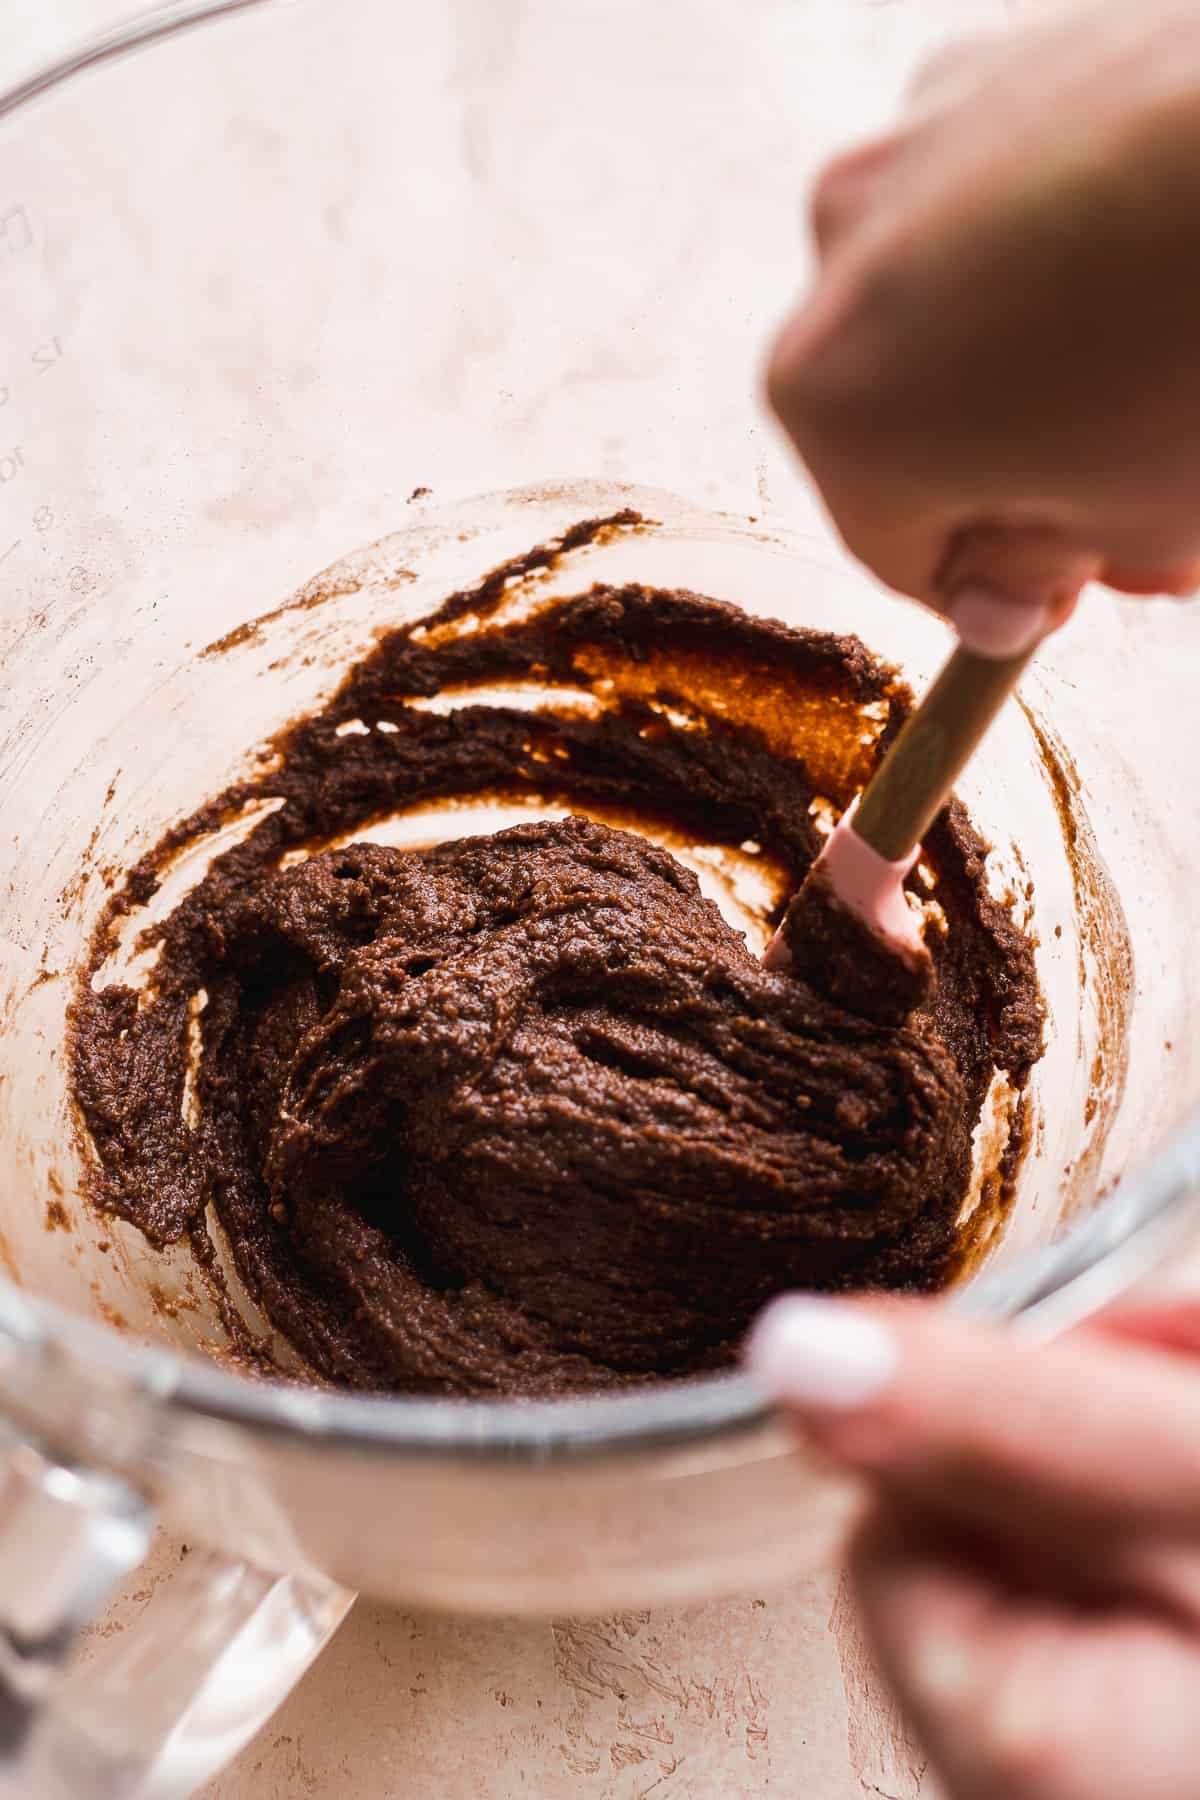 Person mixing chocolate doughnut batter in a glass bowl.